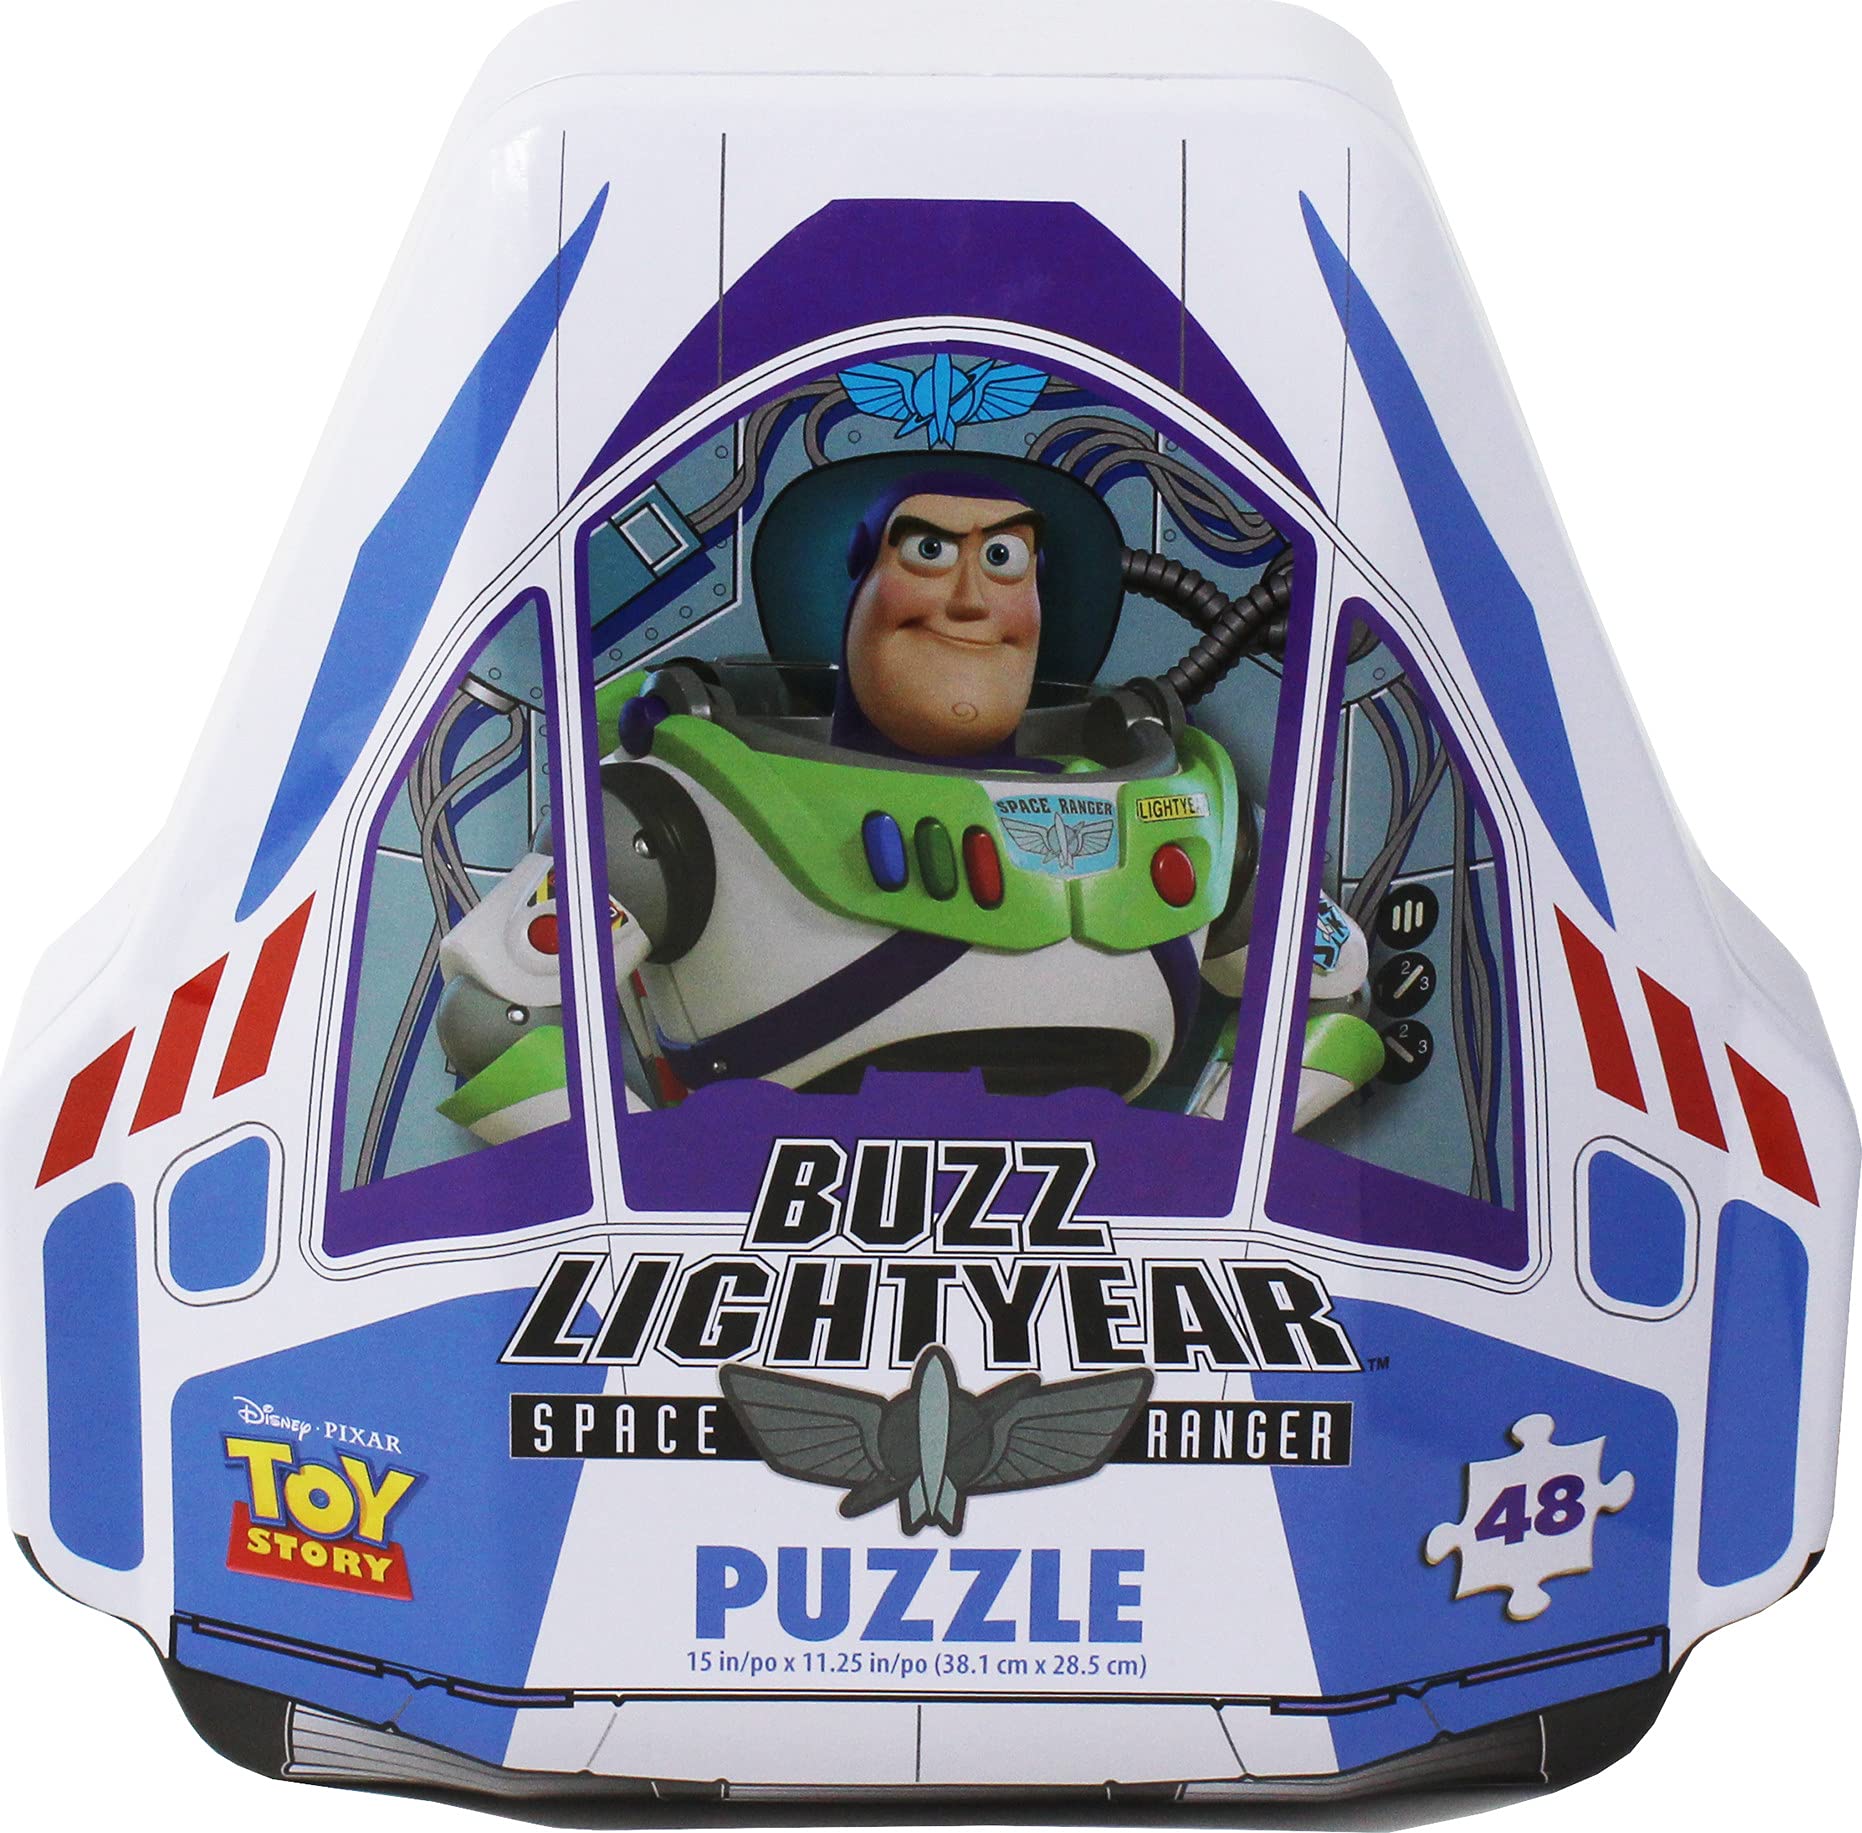 Disney Pixar Toy Story 4 Shaped Buzz Lightyear Tin with 48Piece Surprise Puzzle